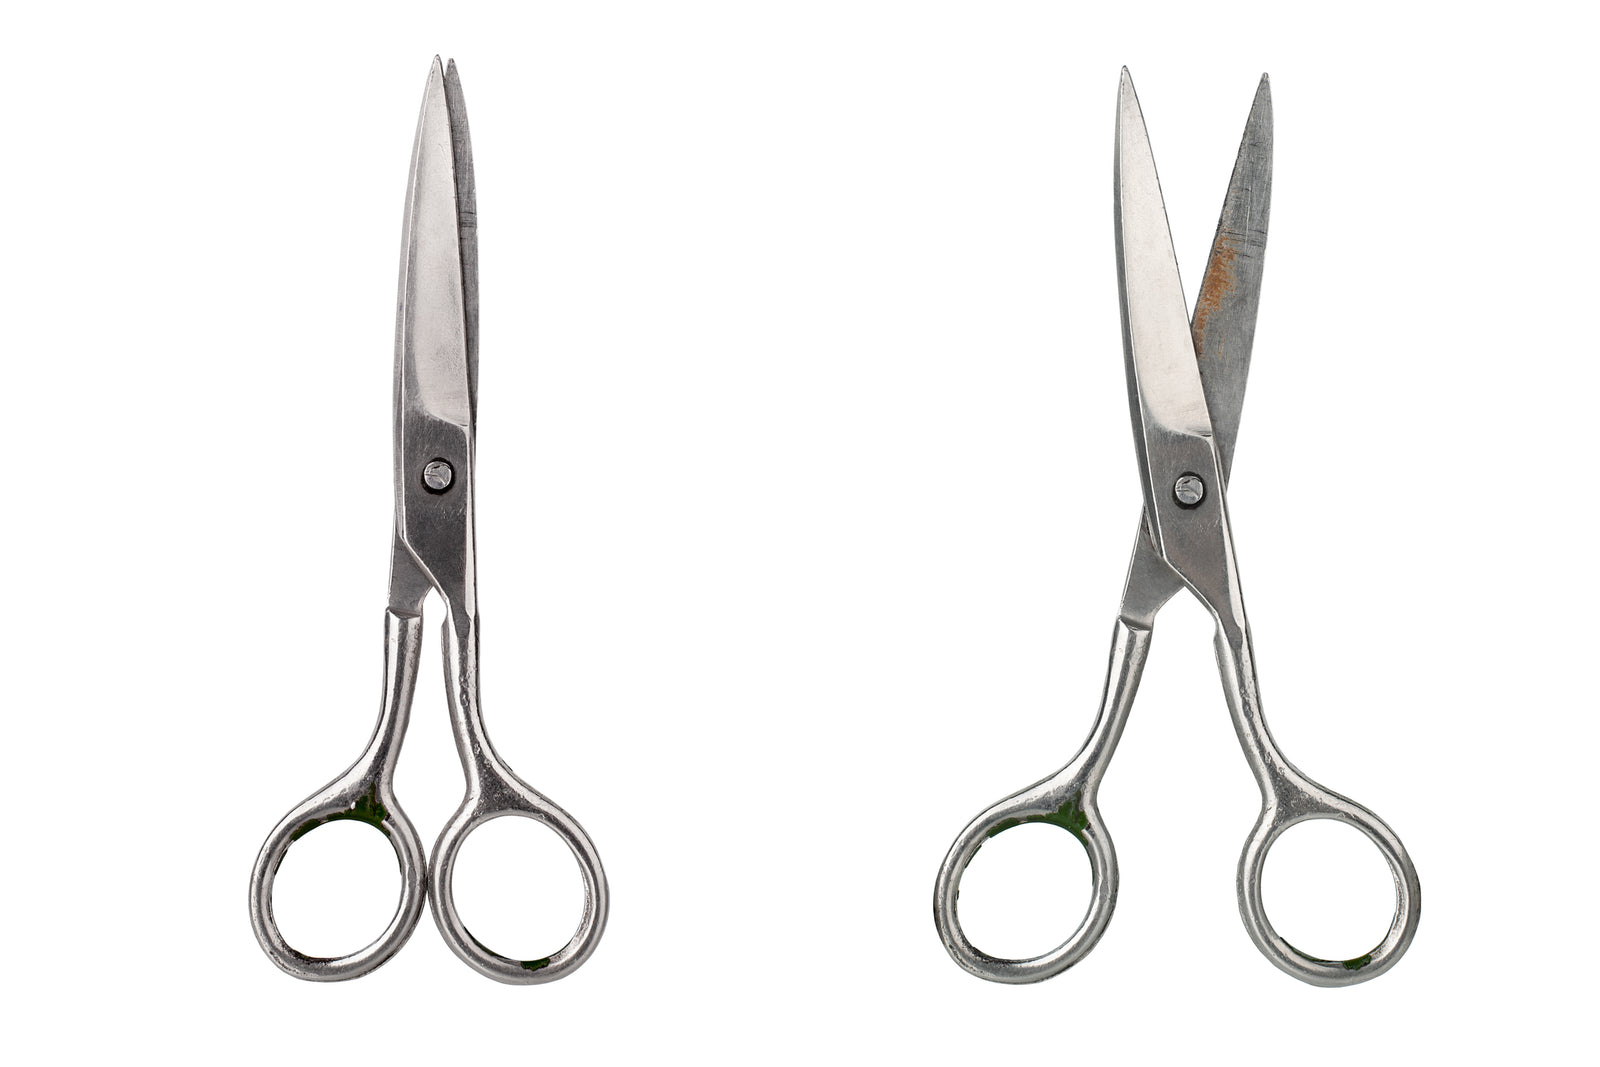 How to Sharpen Hair Scissors in Just 9 Minutes